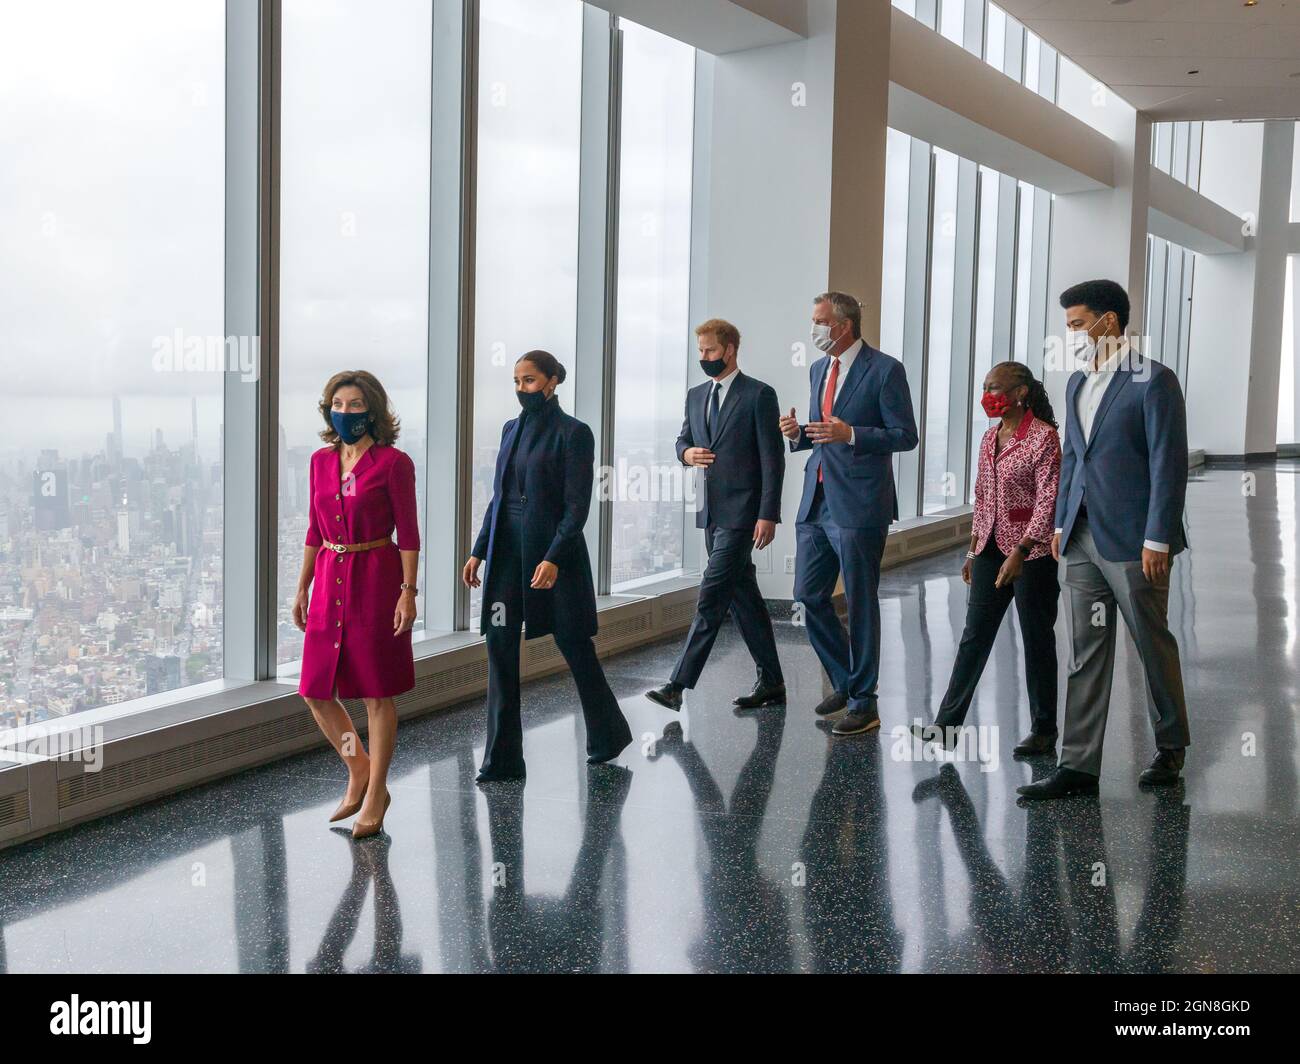 New York, USA, 23 September 2021.  (L-R):  New York Governor Kathy Hochul, Meghan, The Duchess of Sussex, Prince Harry, New York Mayor Bill de Blasio, de Blasio's wife, Chirlane McCray, and son, Dante de Blasio visit the One World Observatory in floor 102 of the New York City's World Trade Center.   Credit: Enrique Shore/Alamy Live News Stock Photo